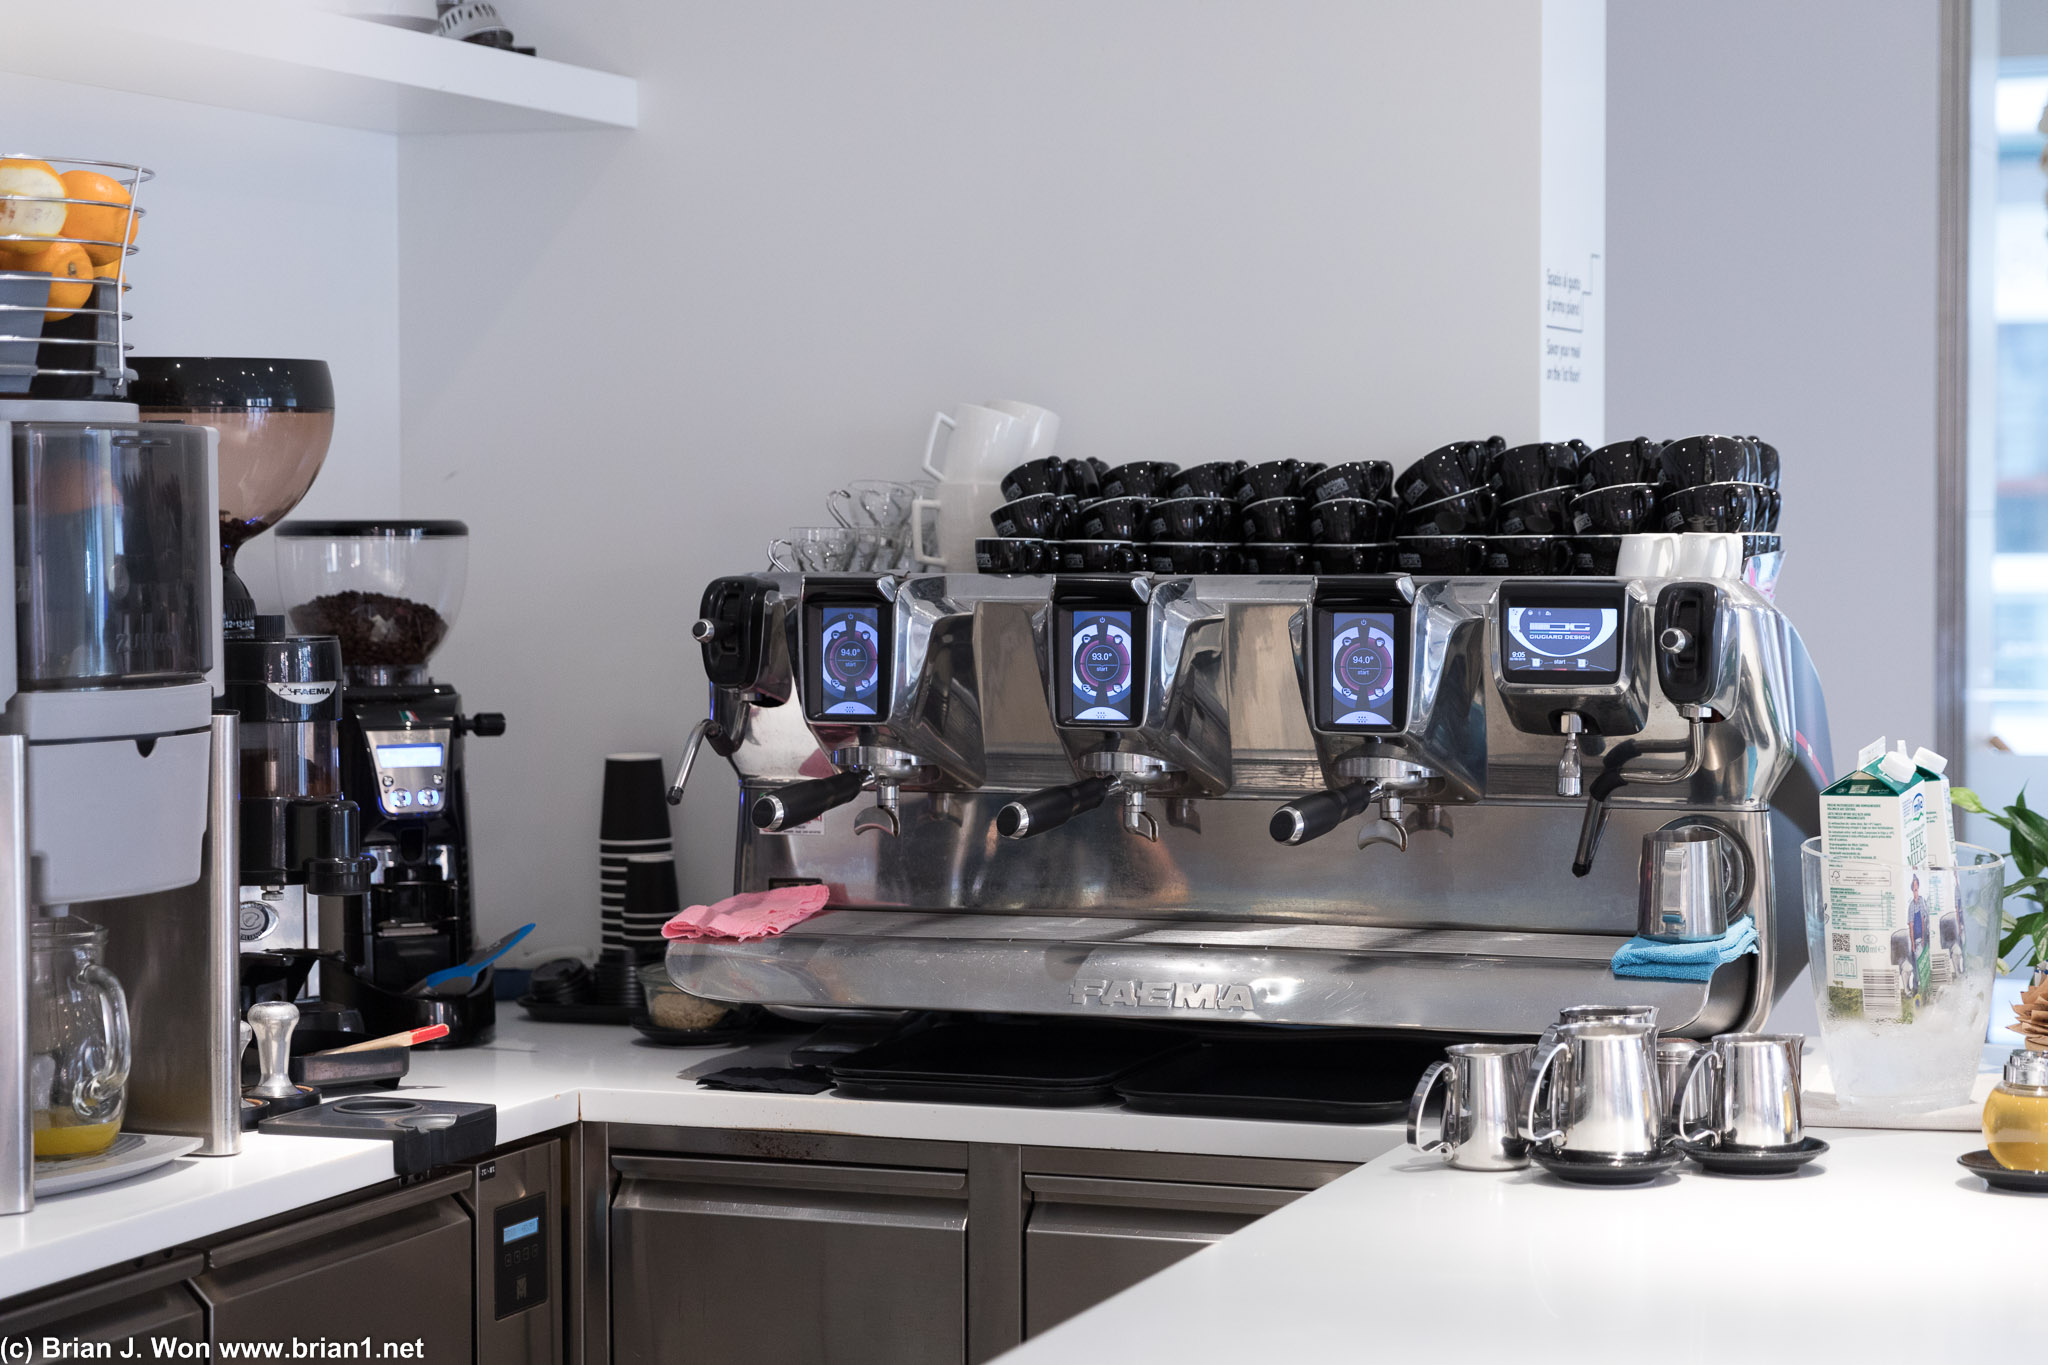 This espresso machine costs as much as a new car.